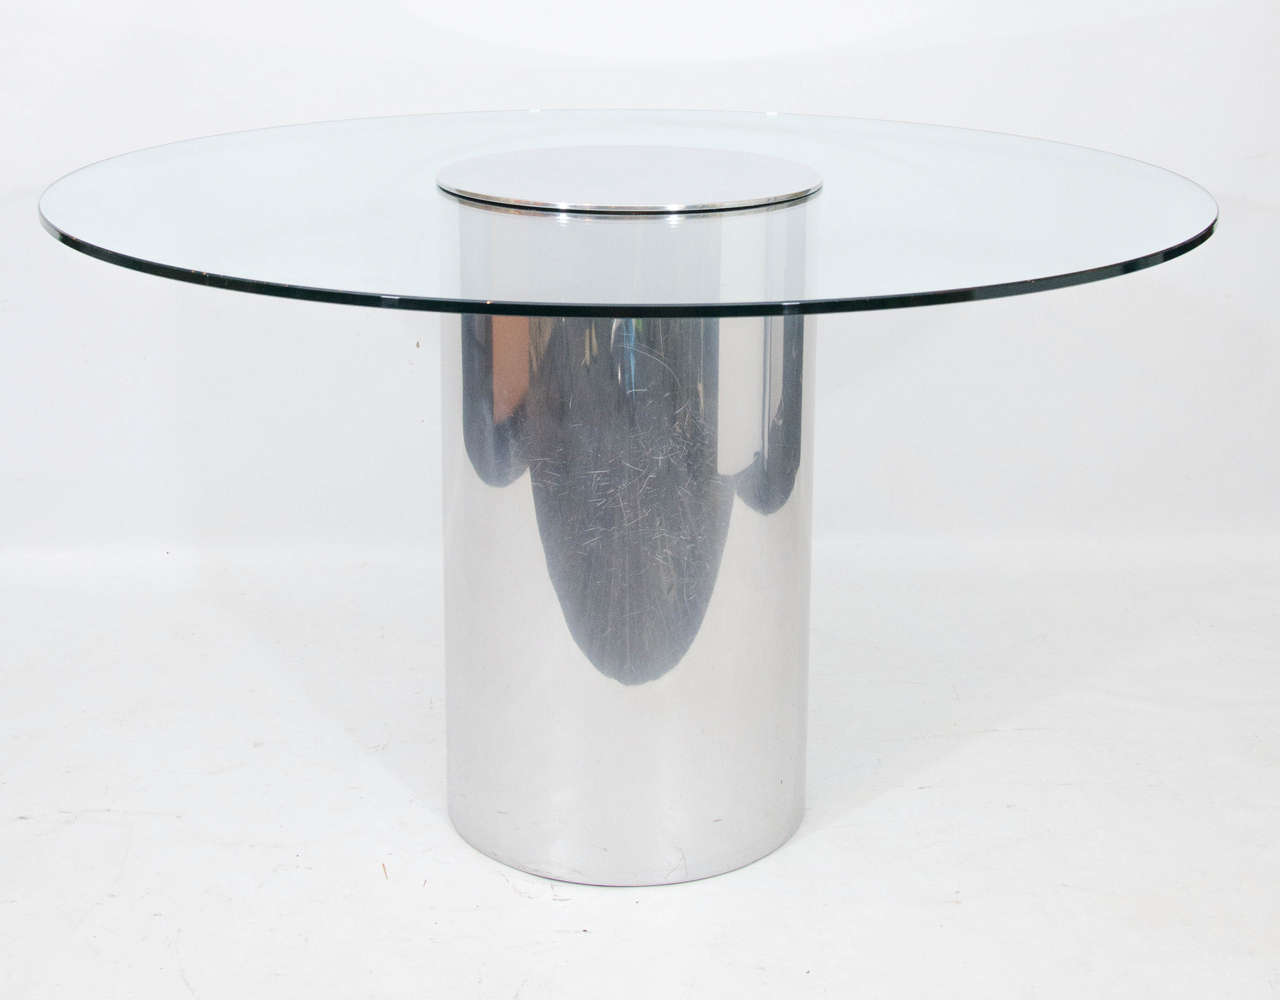 Minimalist modern designed dining table with a polished aluminum pedestal and an integrated glass tabletop. Please contact for location.